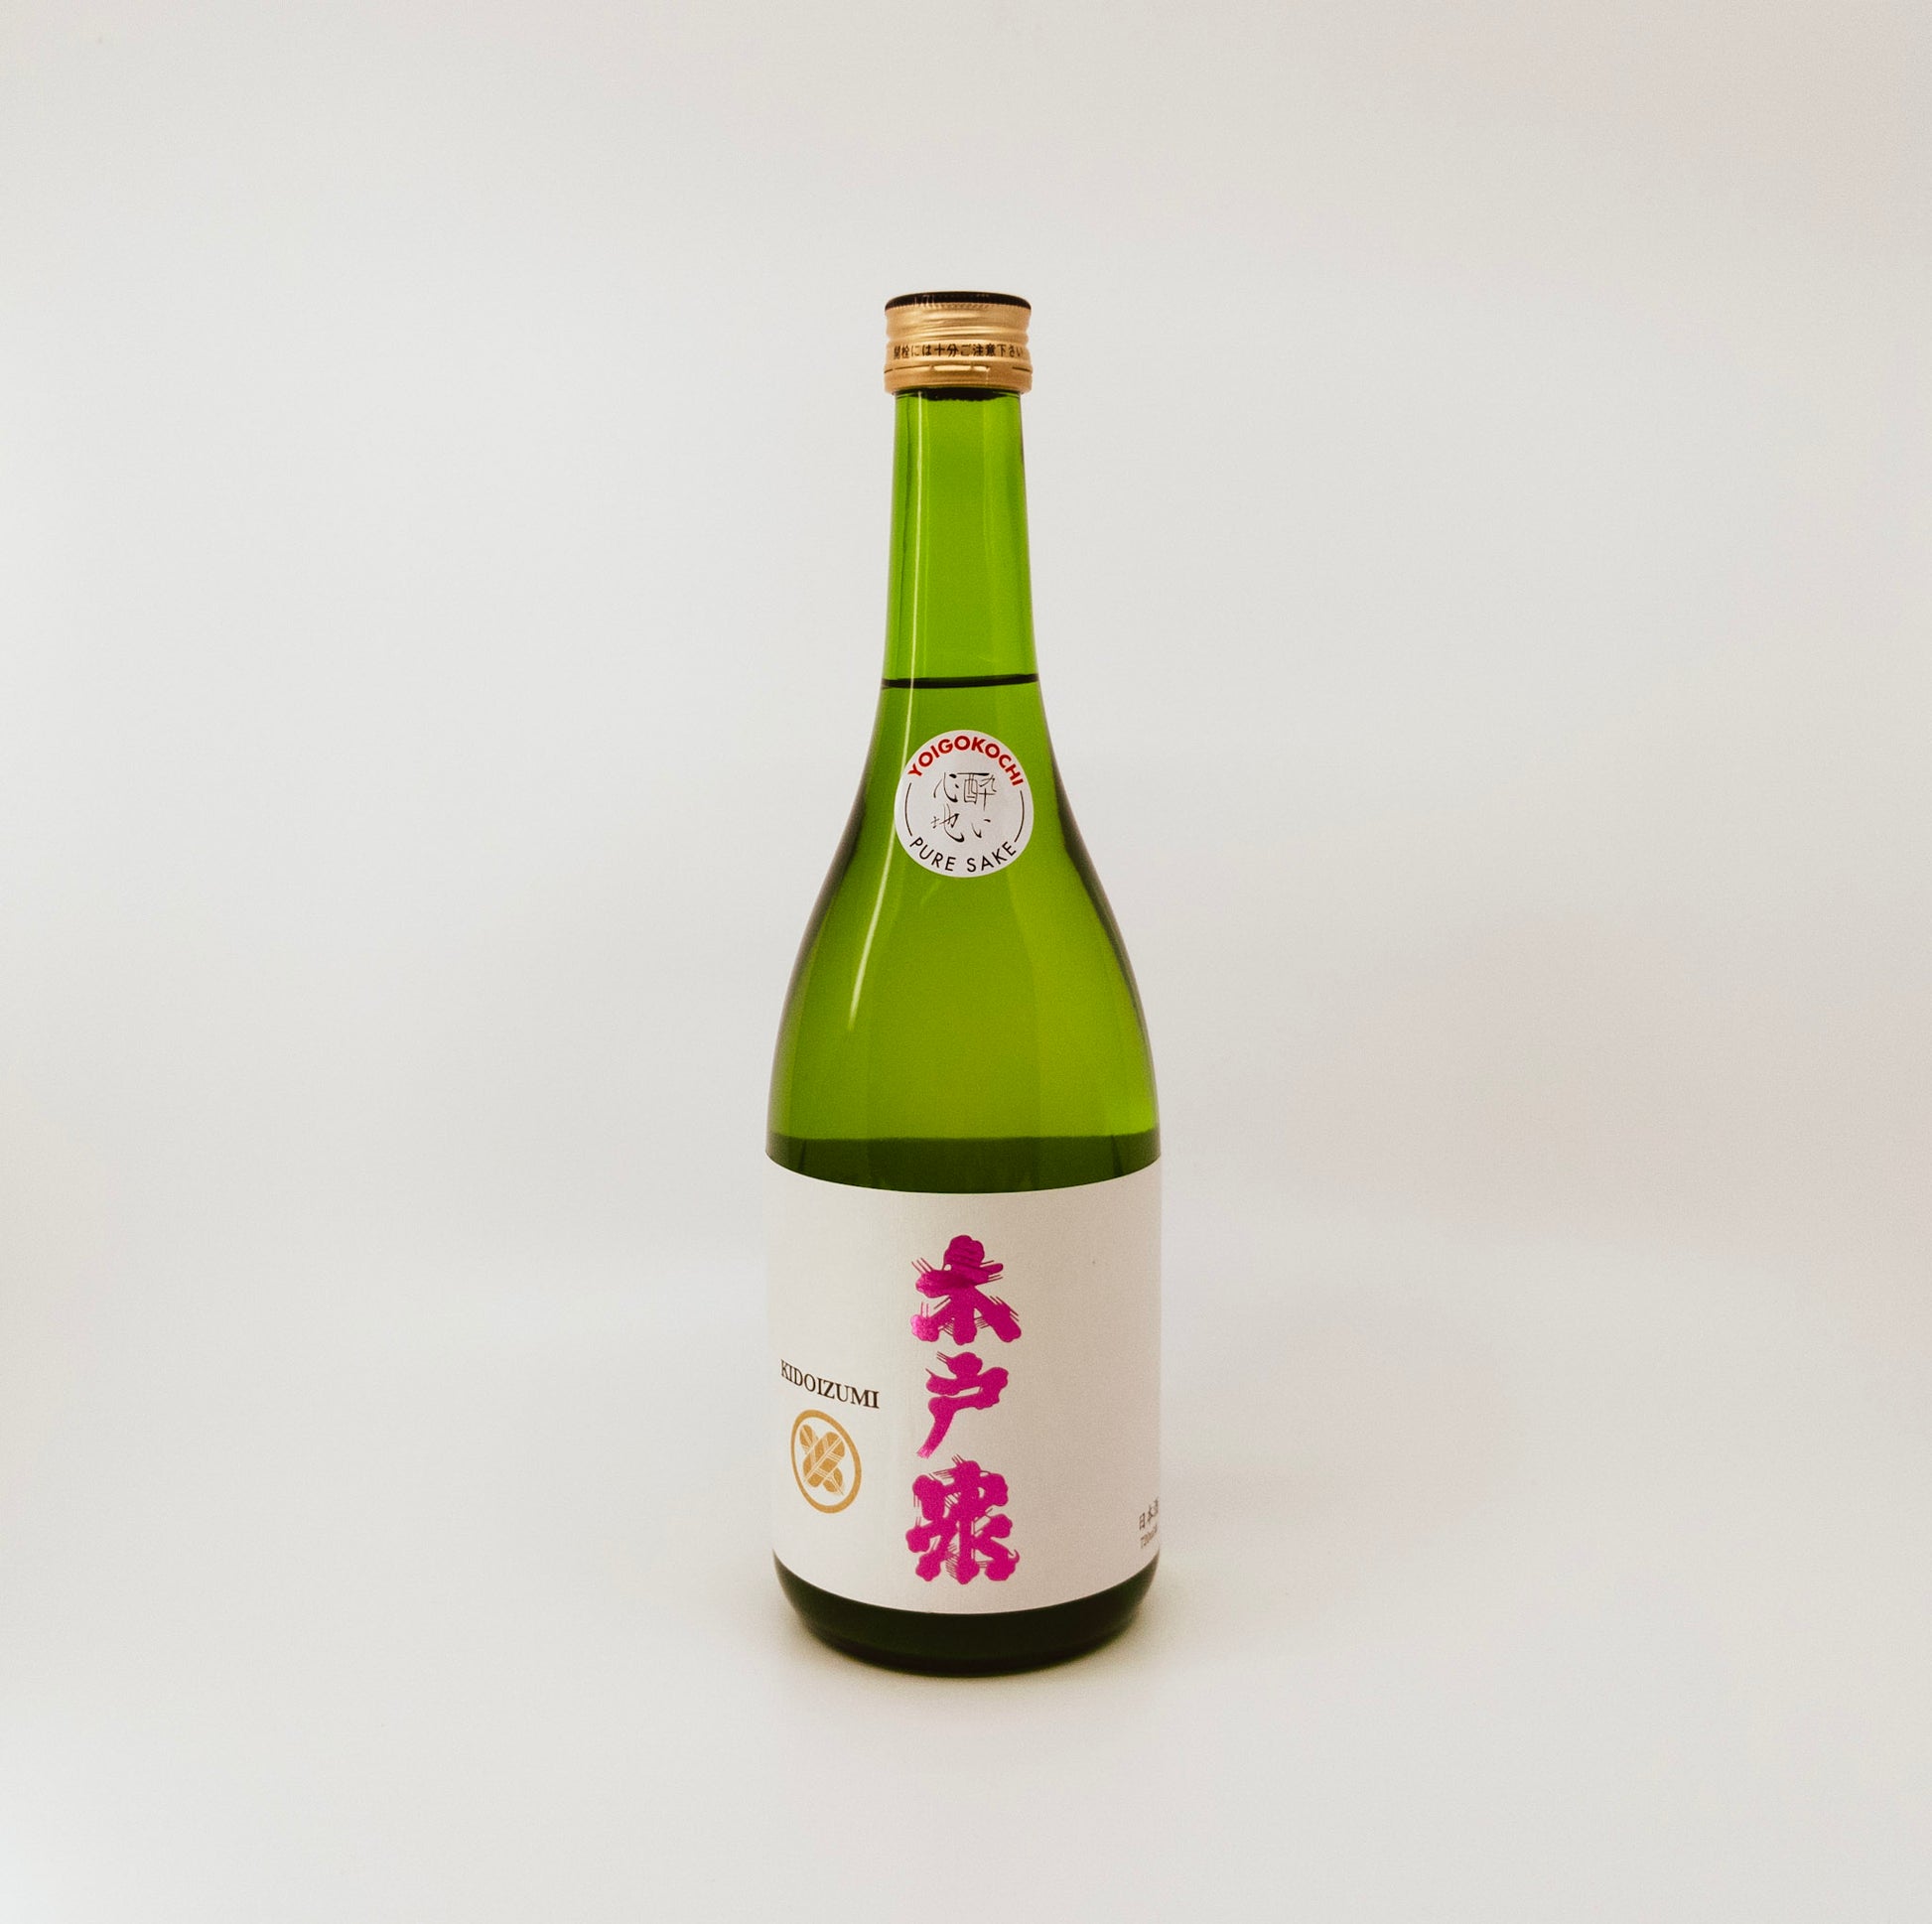 green bottle with pink writing on label